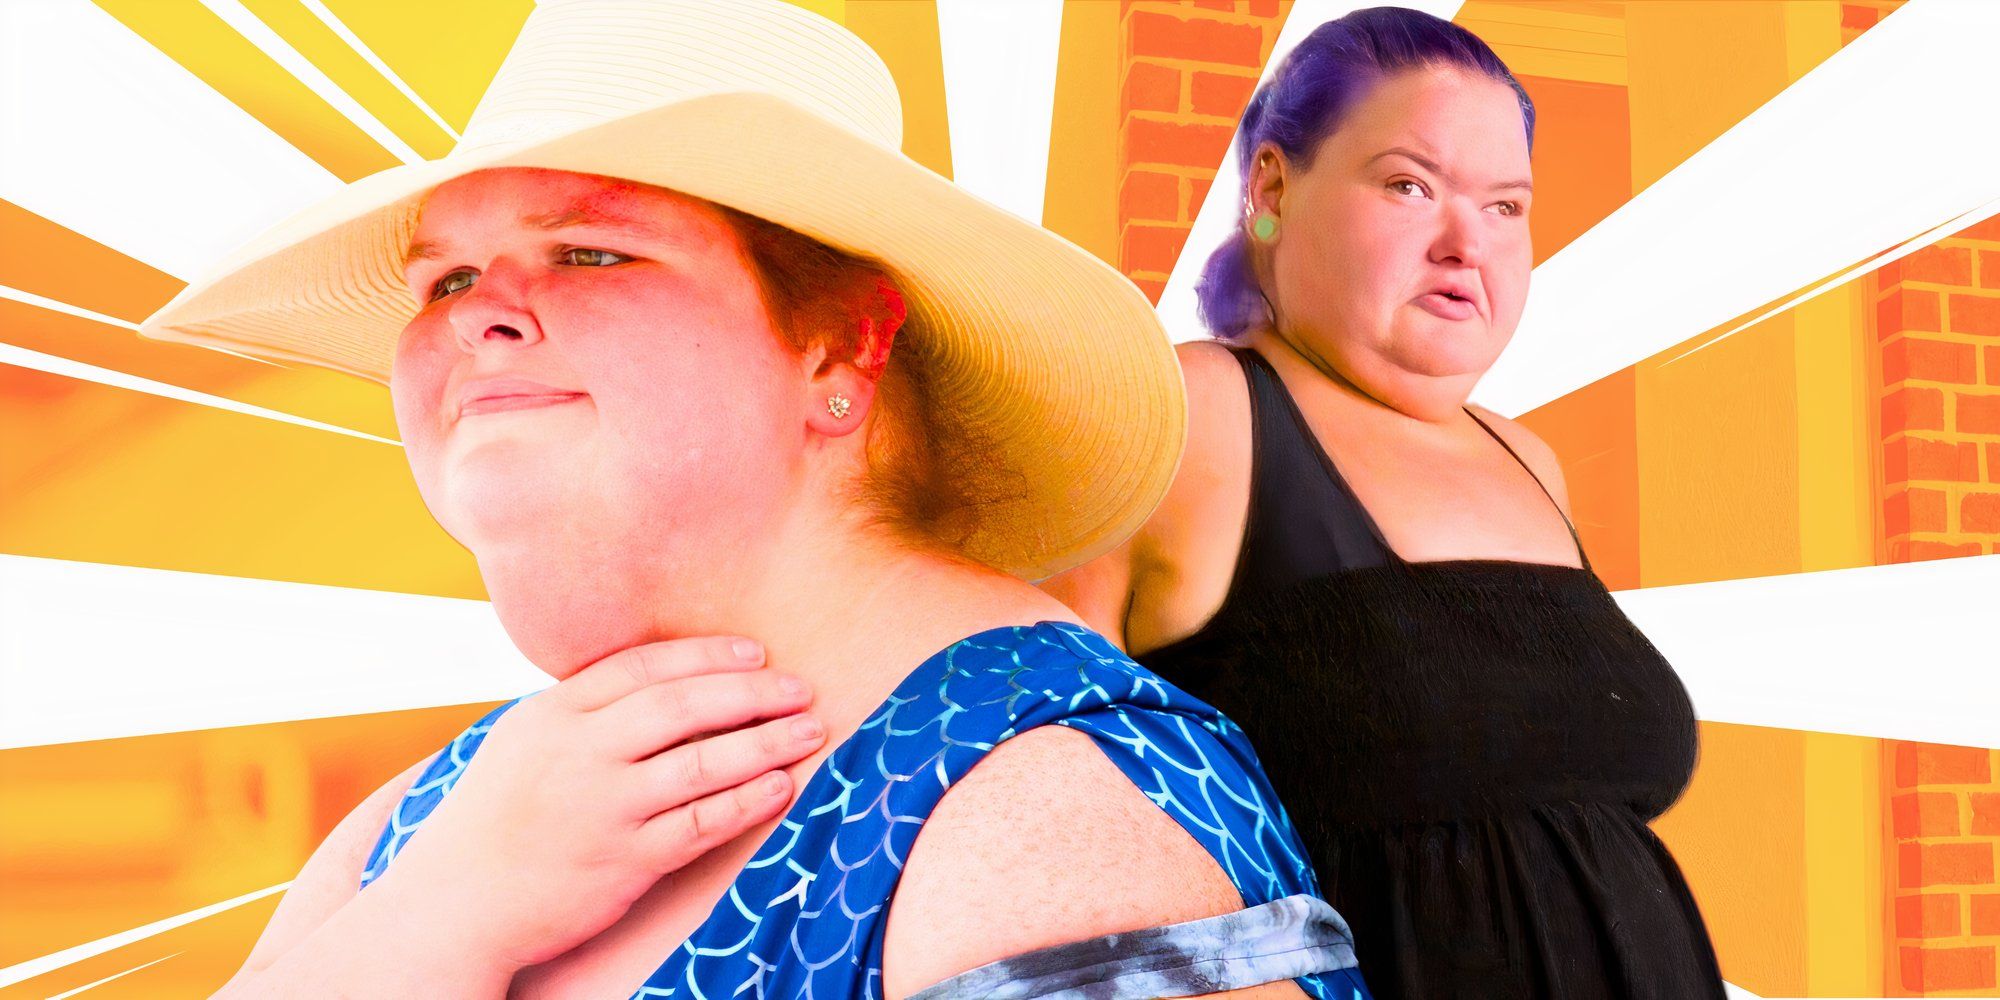 1000 lb sisters stars tammy and amy slaton in montage of them in bathing suits